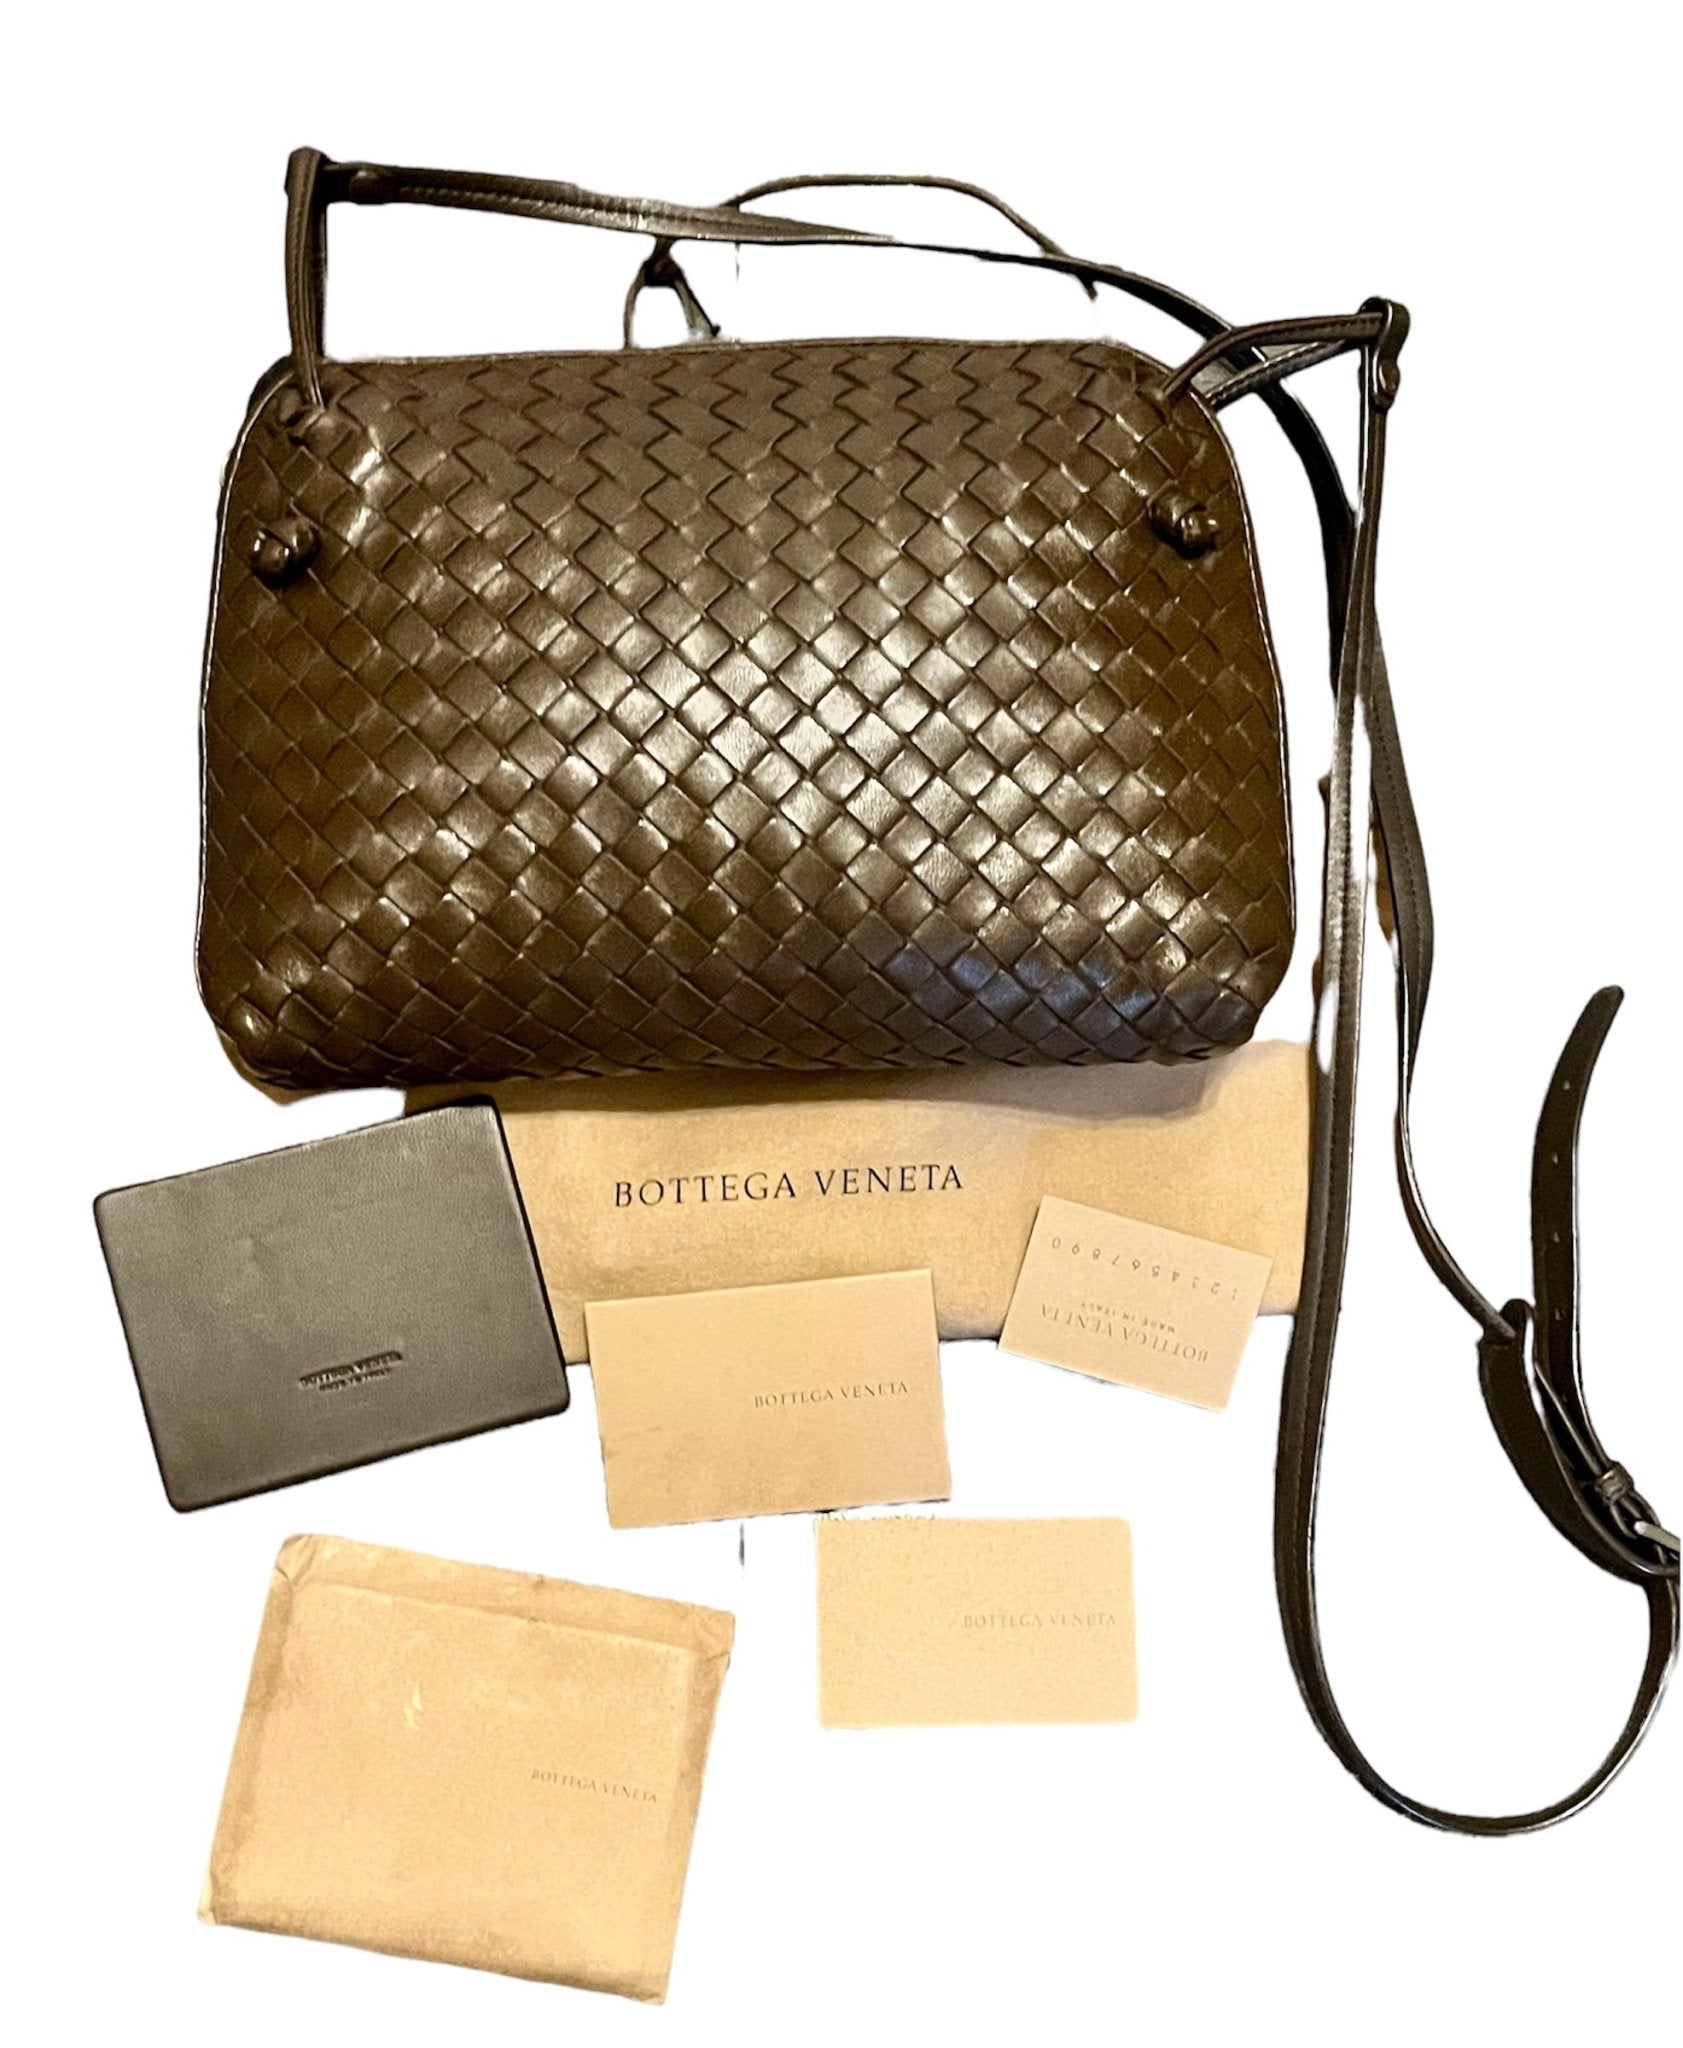 Michael Kors Outlet: Michael bag in saffiano leather - Brown | Michael Kors tote  bags 30S2G6AT2L online at GIGLIO.COM